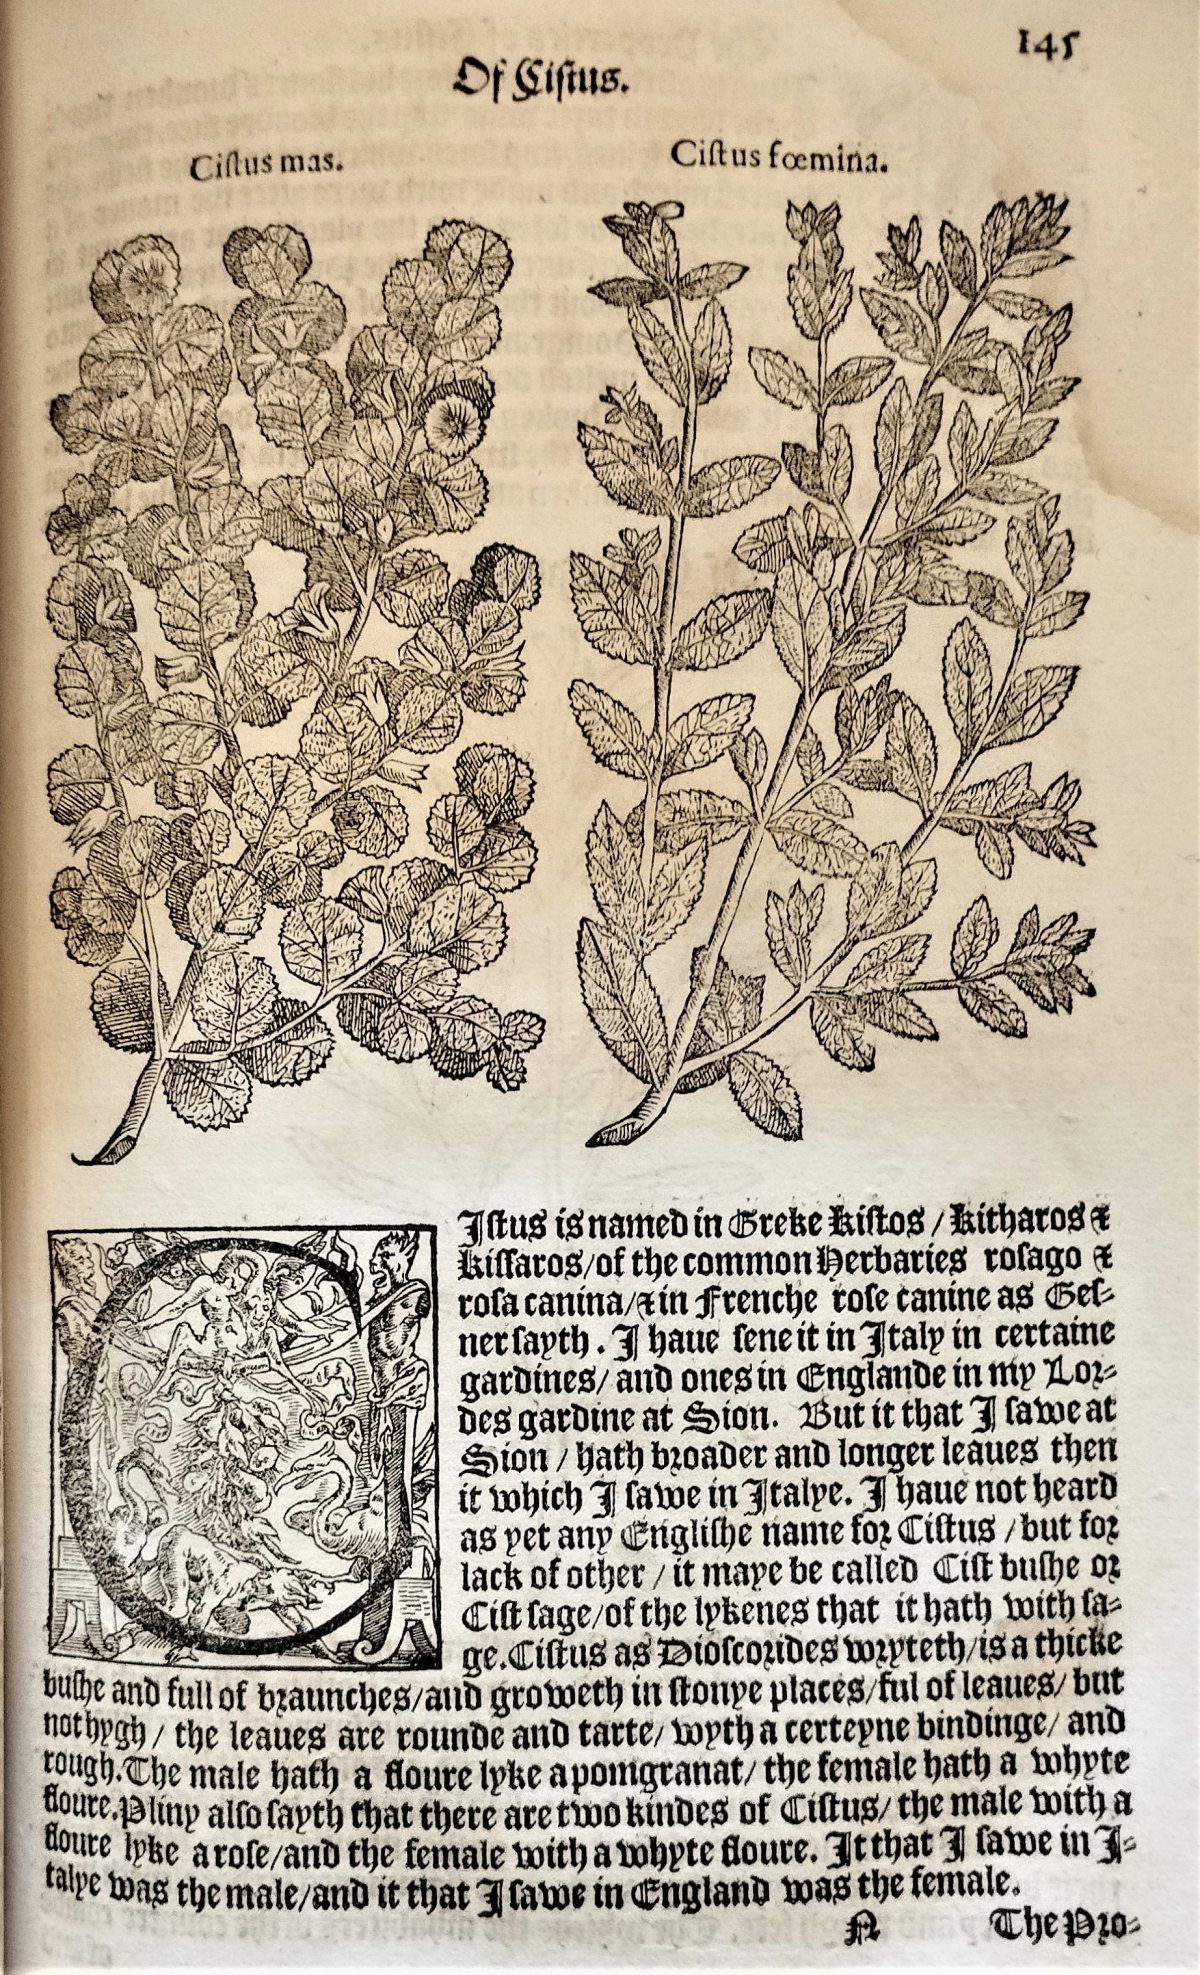 Page with the nomenclature, description and woodcuts illustration of the cistus plant and flowers.